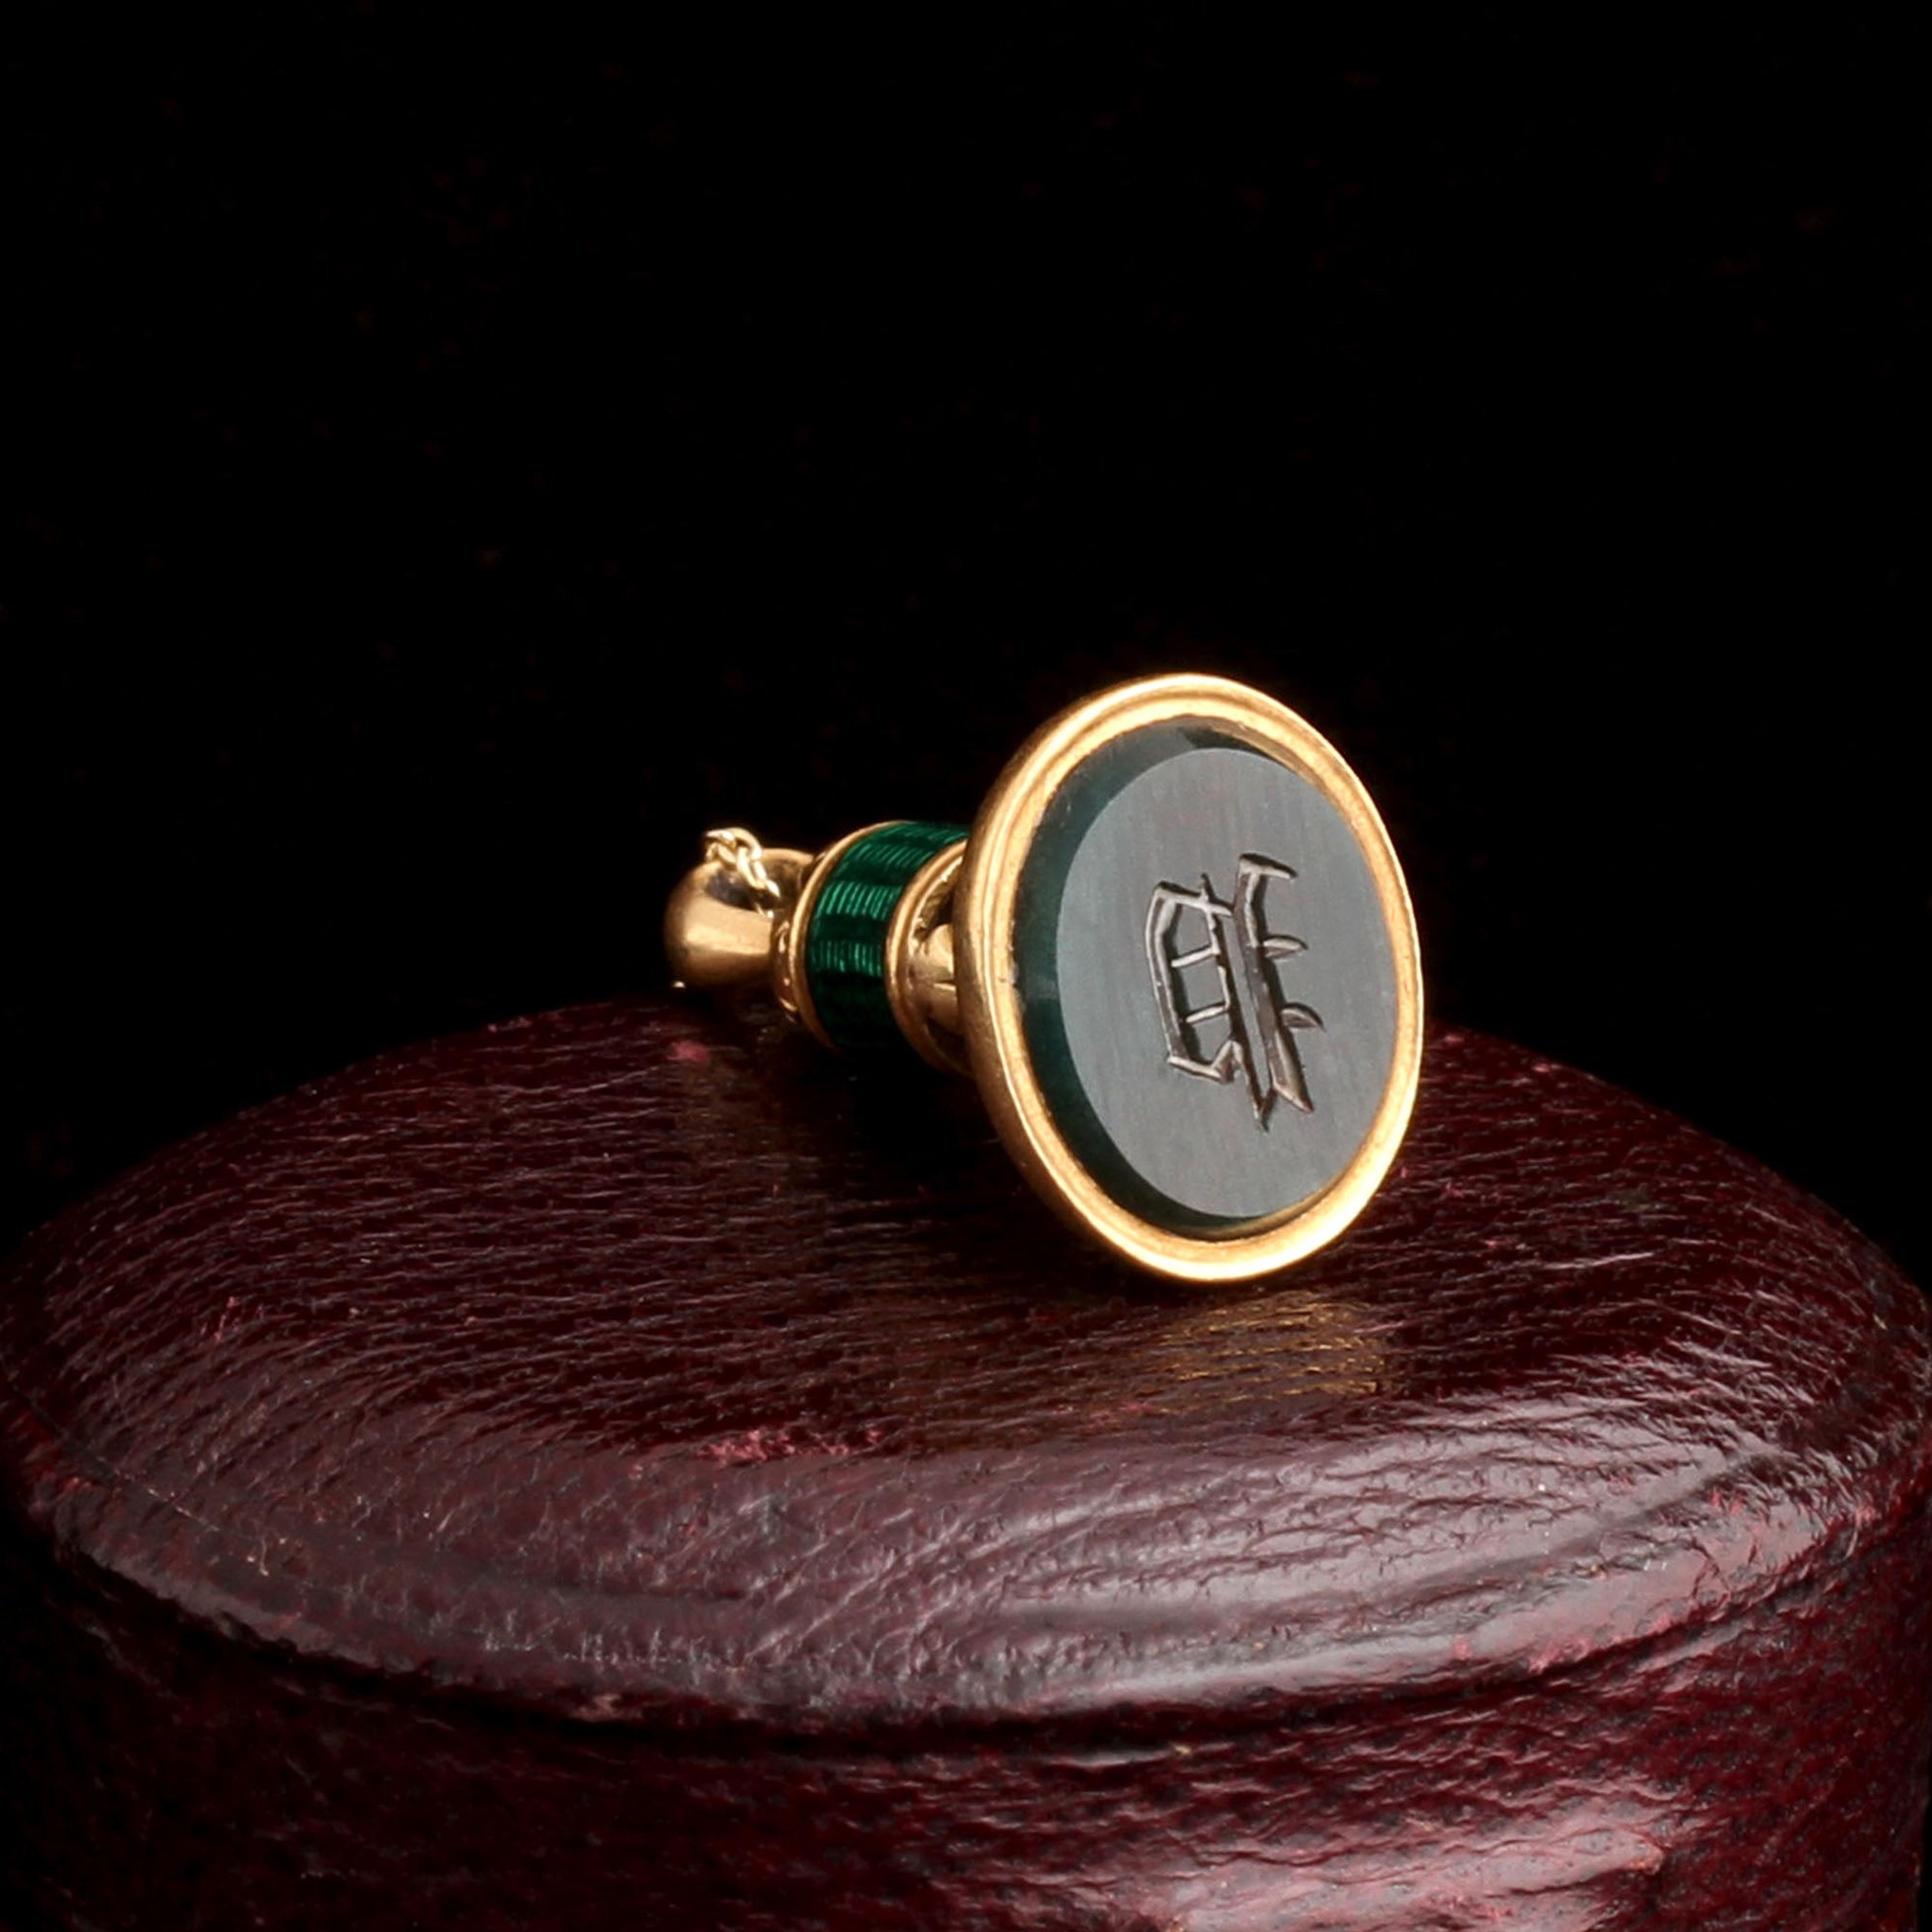 Detail of Early 19th Century French Gold & Enamel "P" Wax Seal Necklace